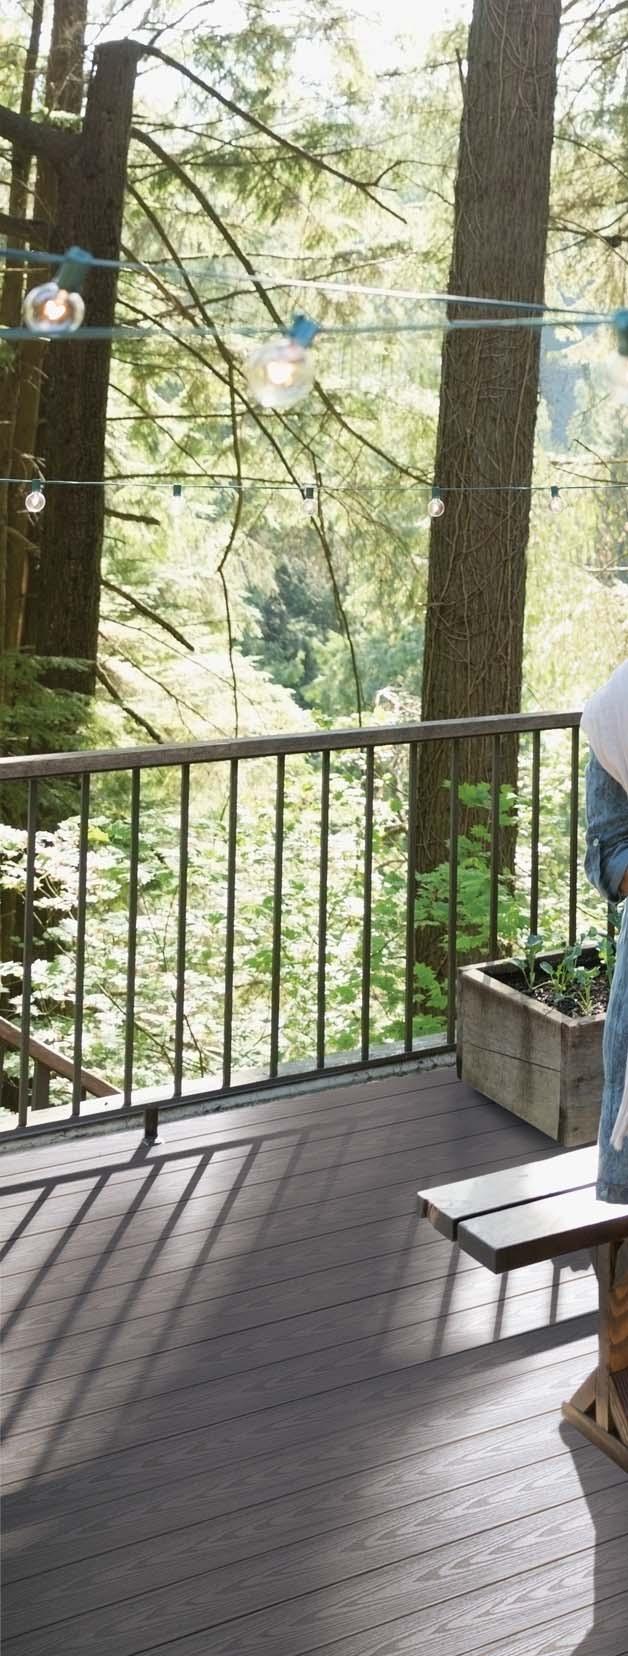 A TOUGH ACT TO FOLLOW Take in the outdoors with decking that takes durability and style to a whole new level.